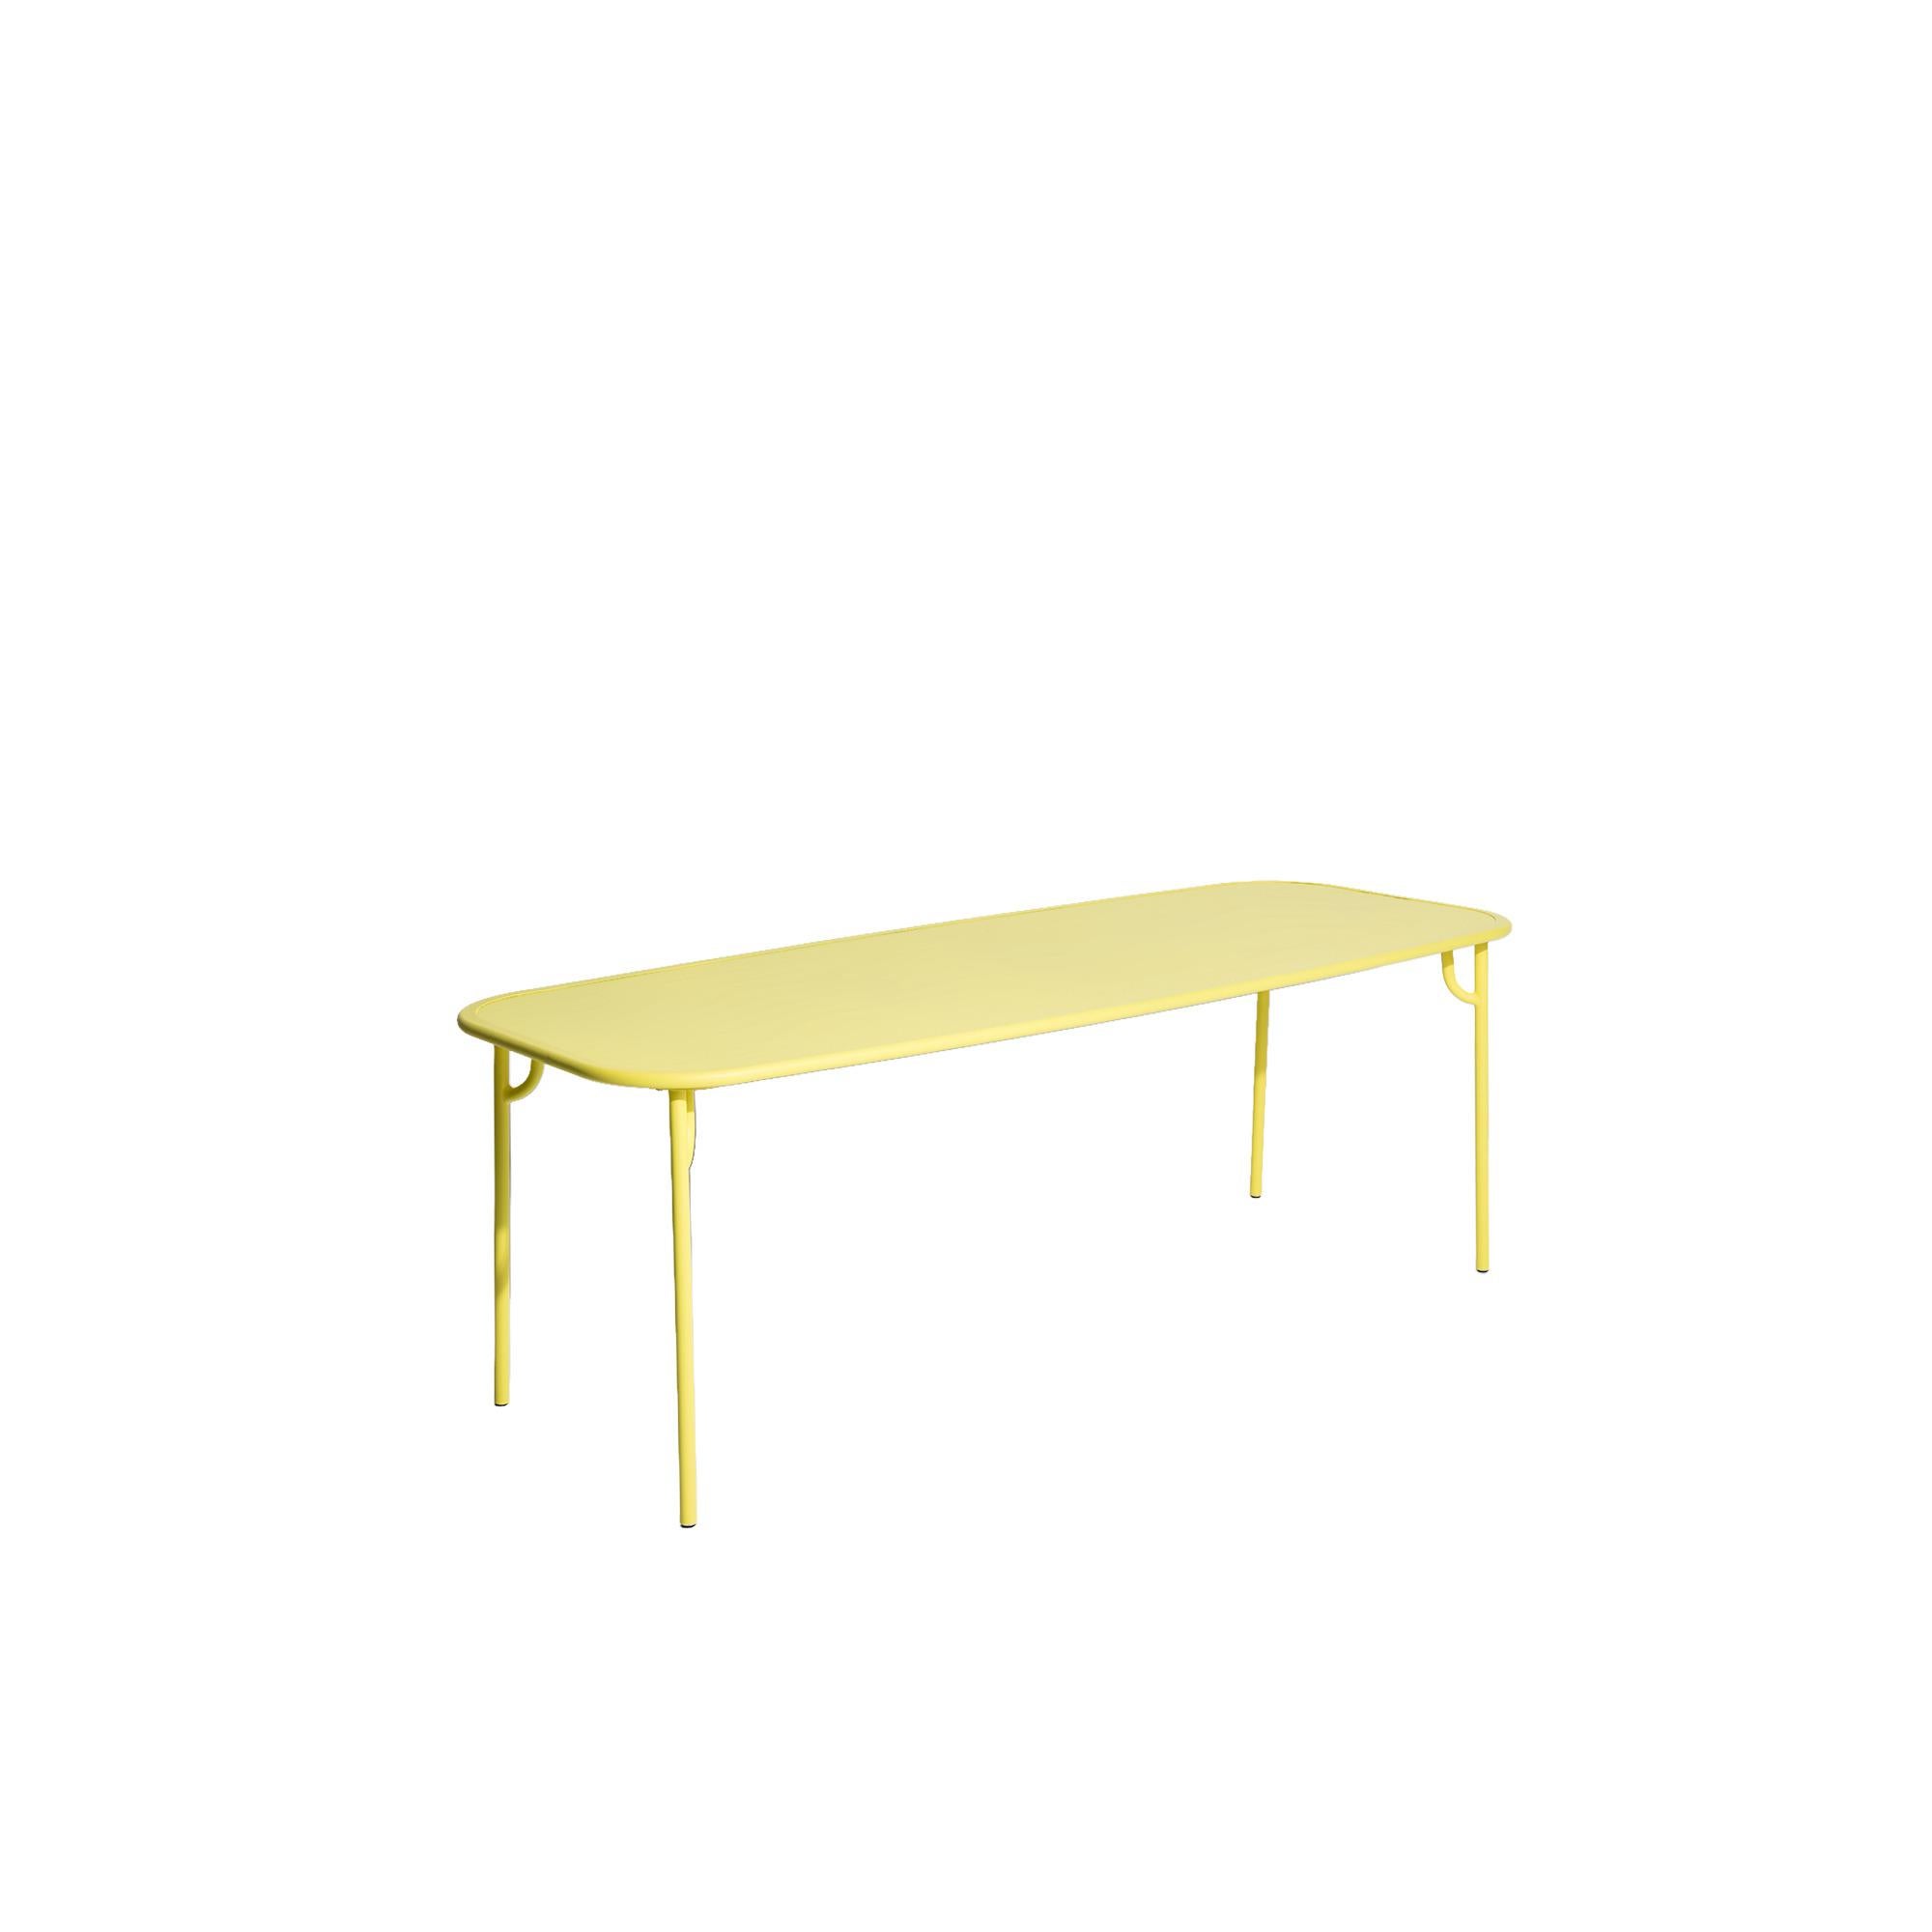 Petite Friture Week-End Large Plain Rectangular Dining Table in Yellow Aluminium by Studio BrichetZiegler, 2017

The week-end collection is a full range of outdoor furniture, in aluminium grained epoxy paint, matt finish, that includes 18